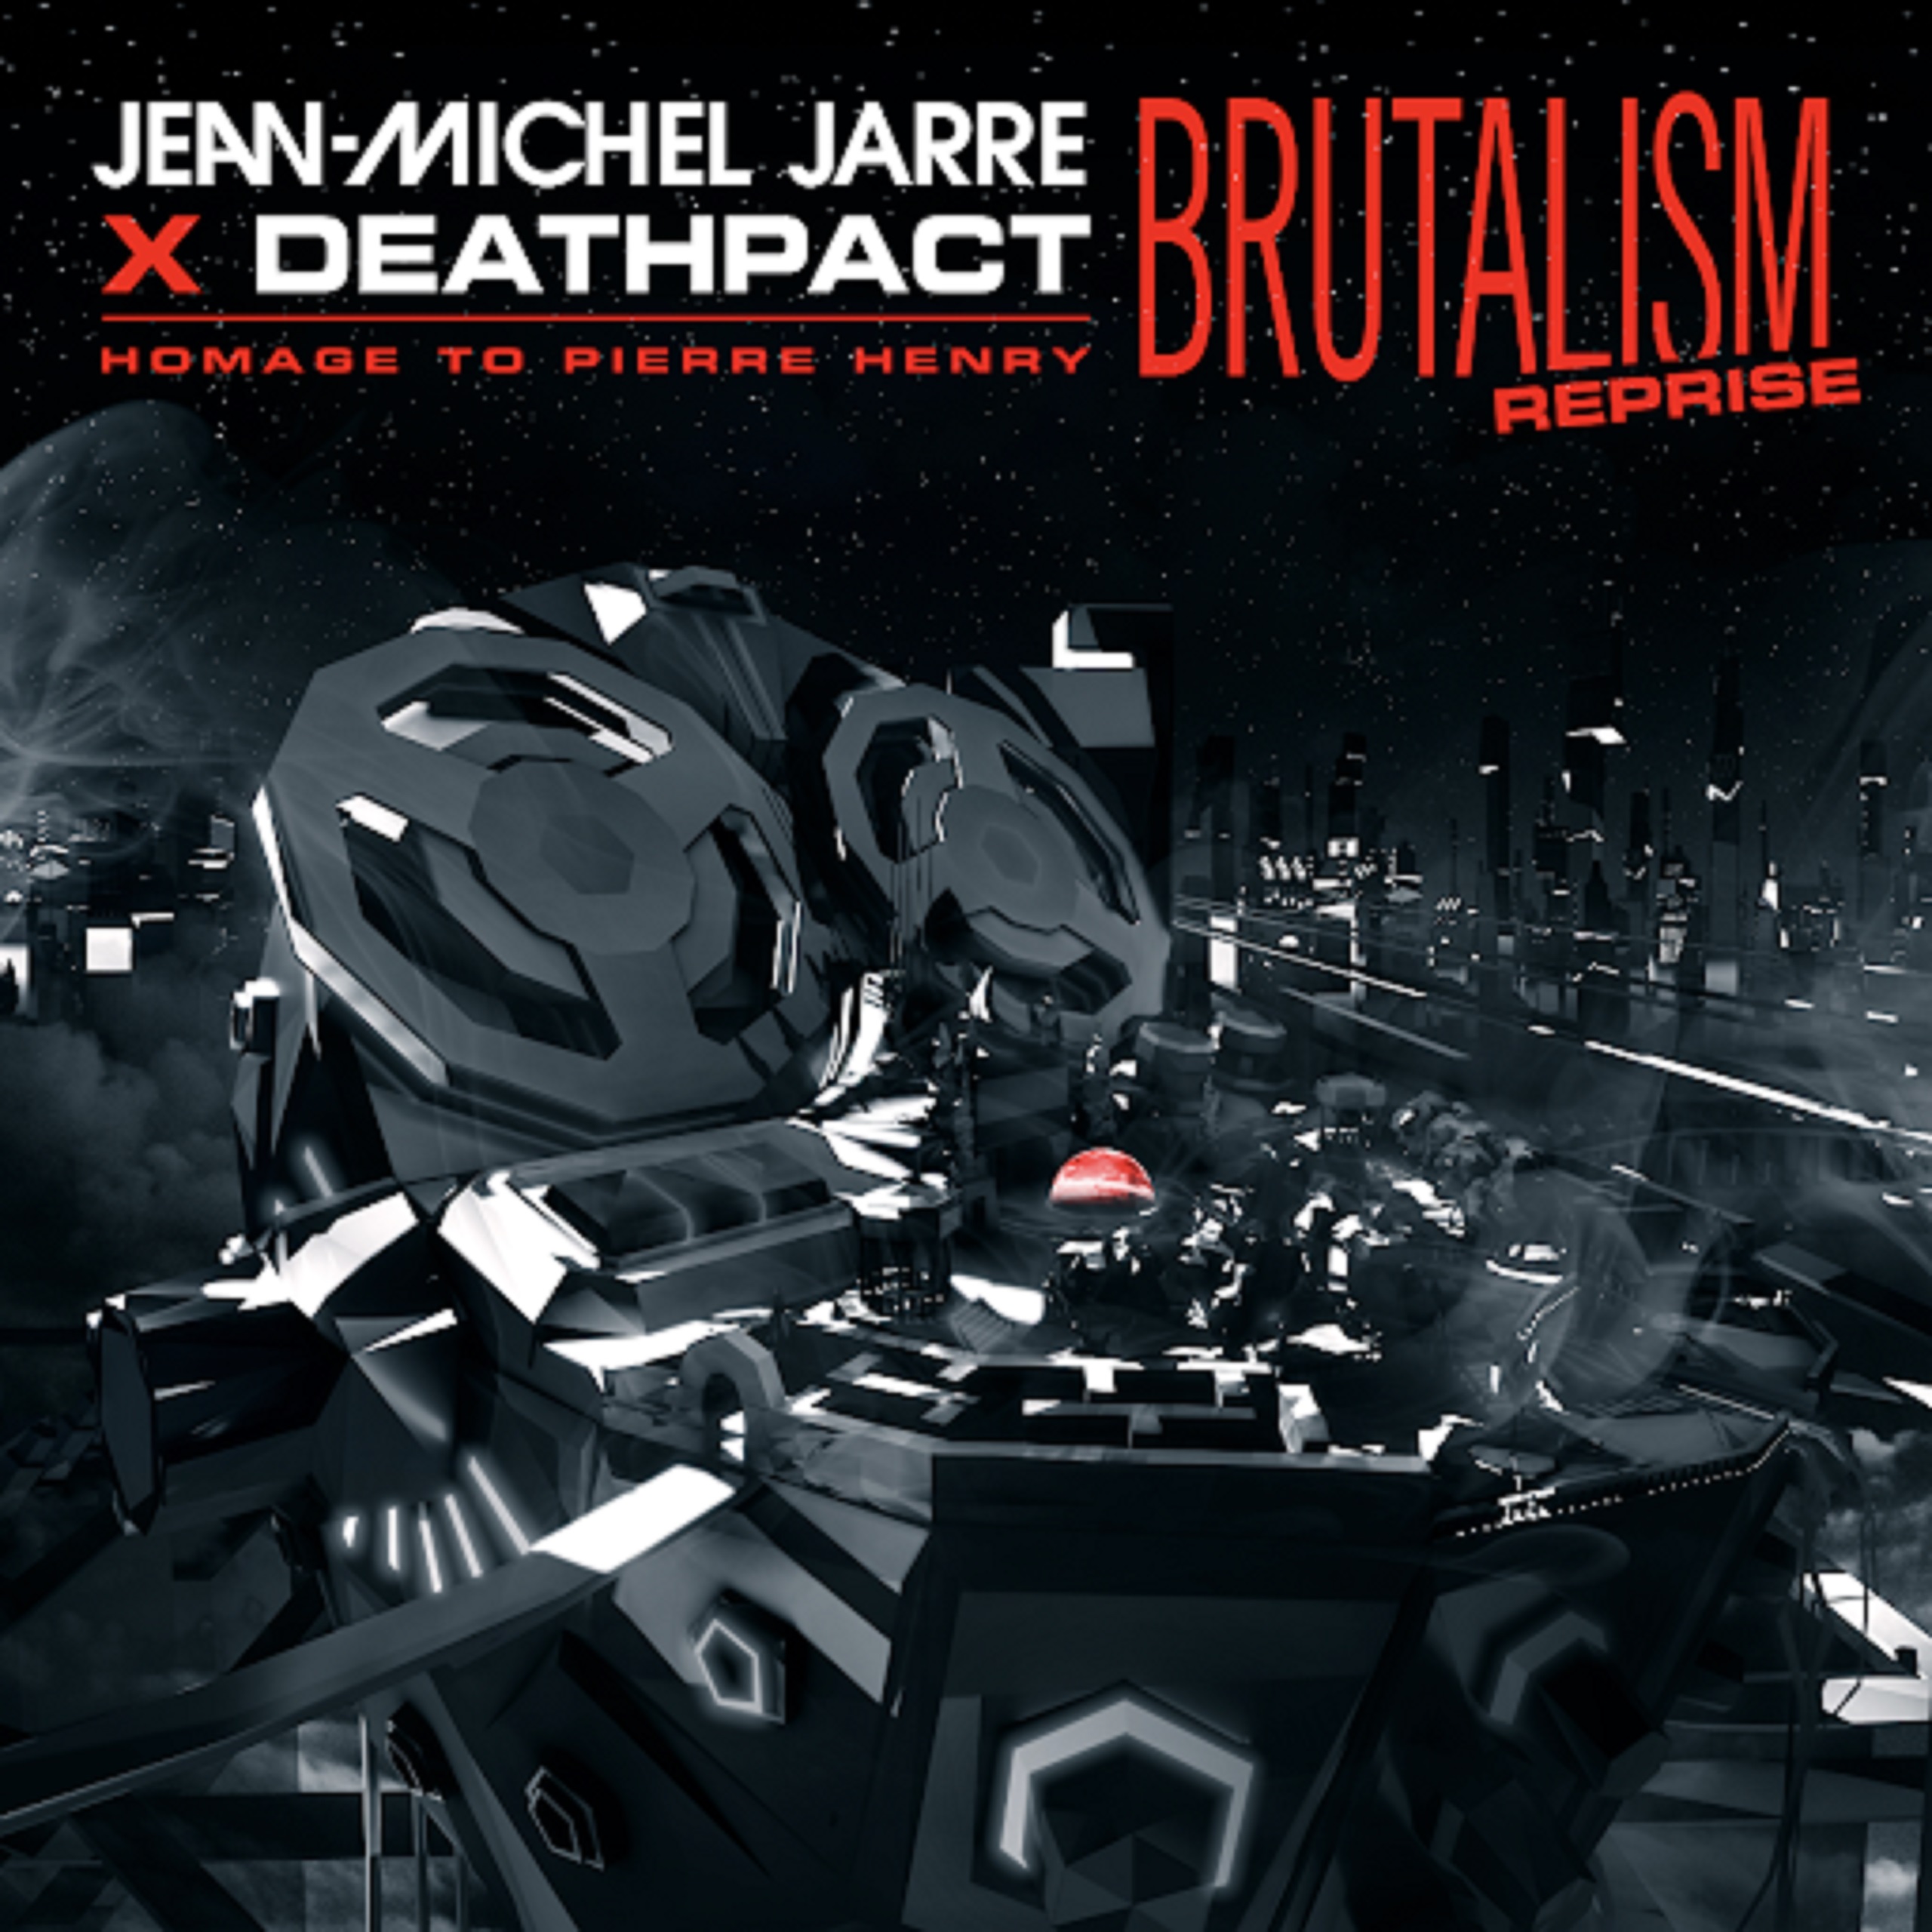 Jean-Michel Jarre Collaborates with Deathpact on "Brutalism Reprise"